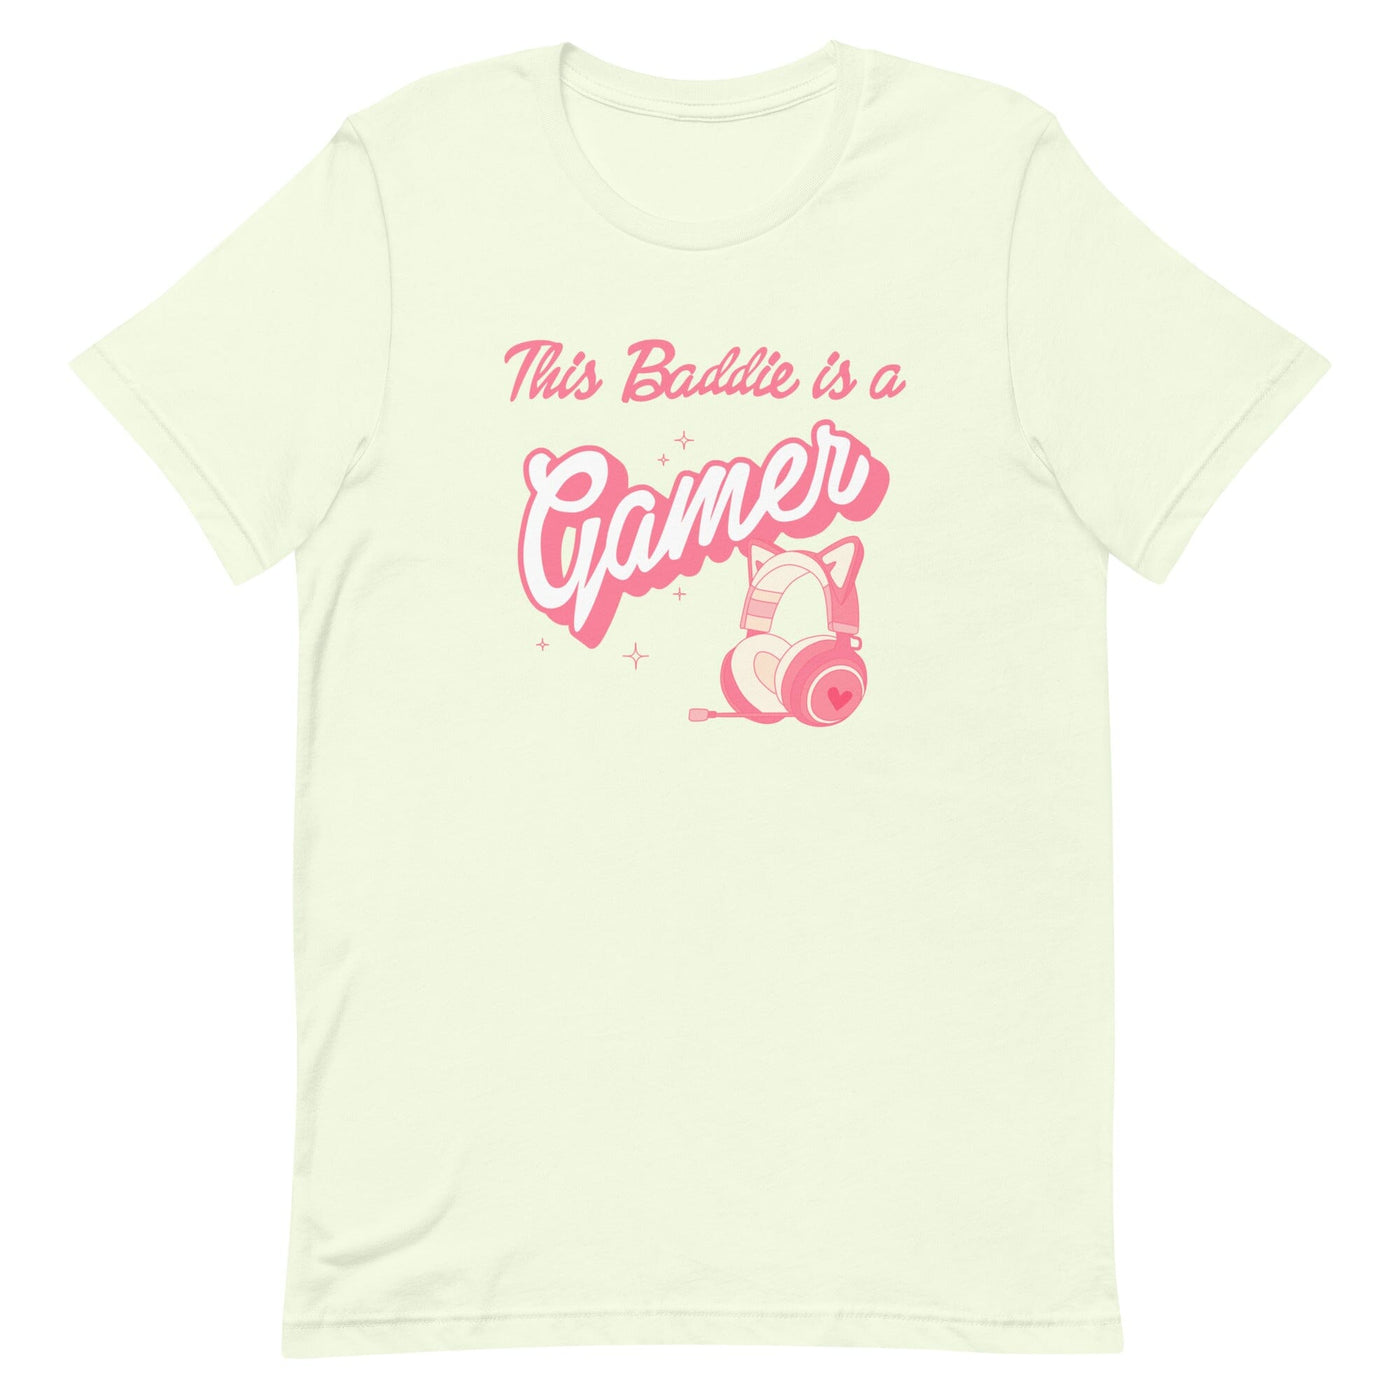 This Baddie is a Gamer | Unisex t-shirt | Feminist Gamer Threads & Thistles Inventory Citron (Girly Girl) XS 